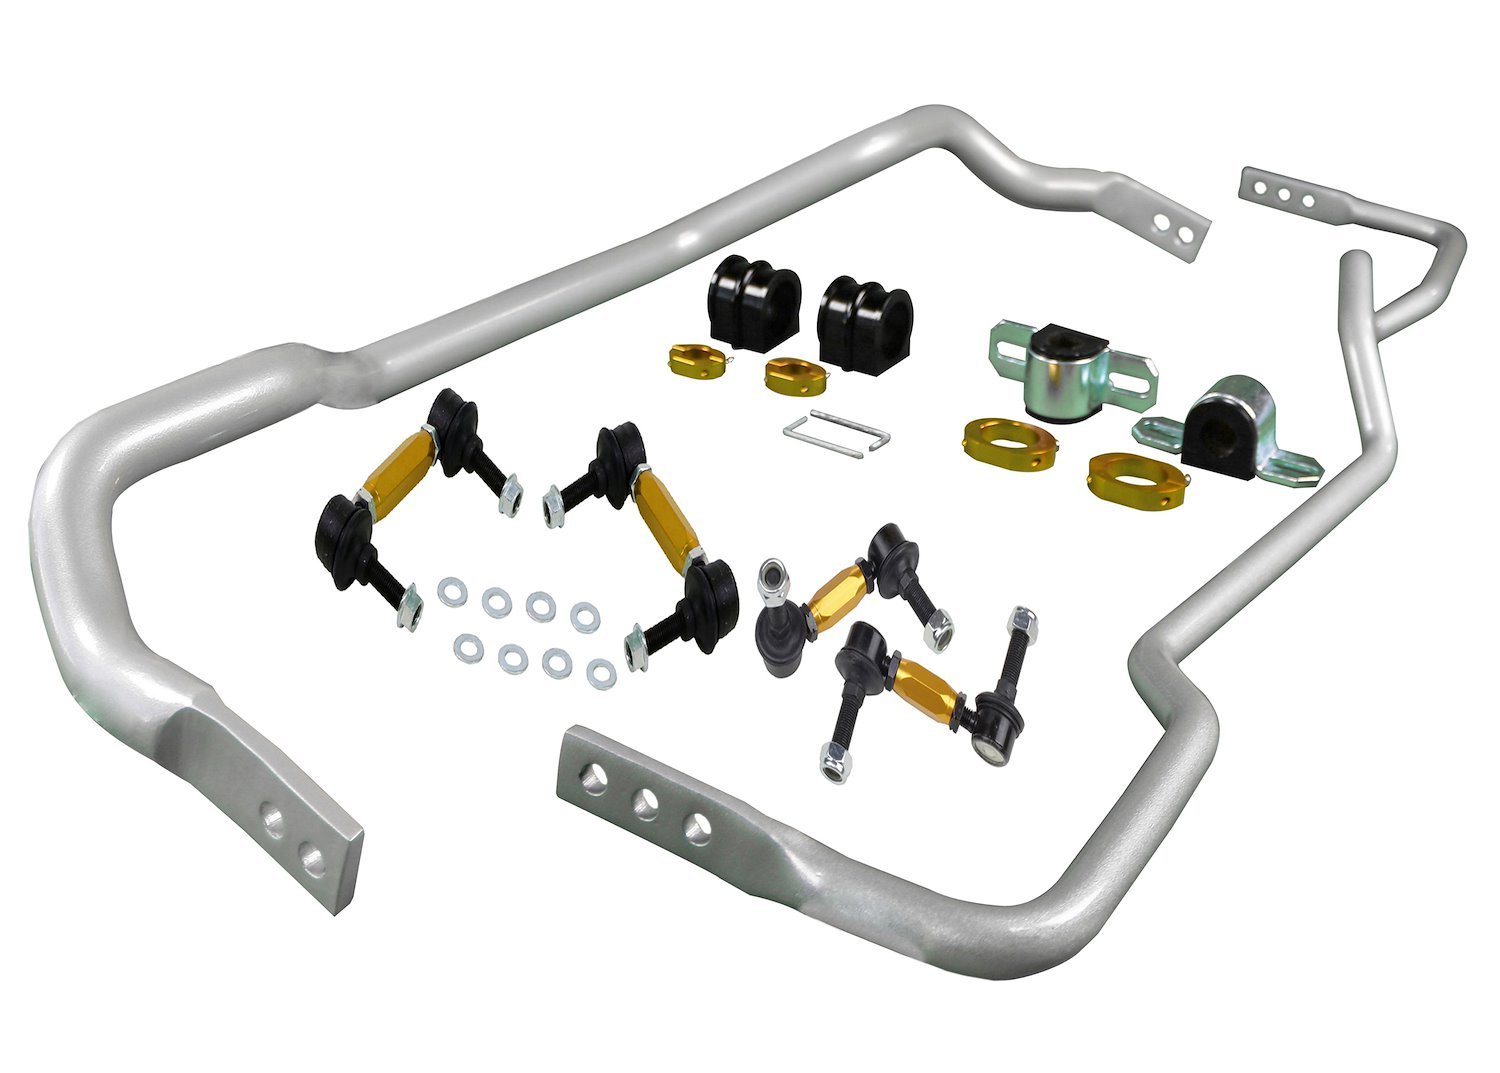 BNK006 Front and Rear Sway Bar Assembly Kit for 2003-2008 Nissan 350Z, Infinti G35